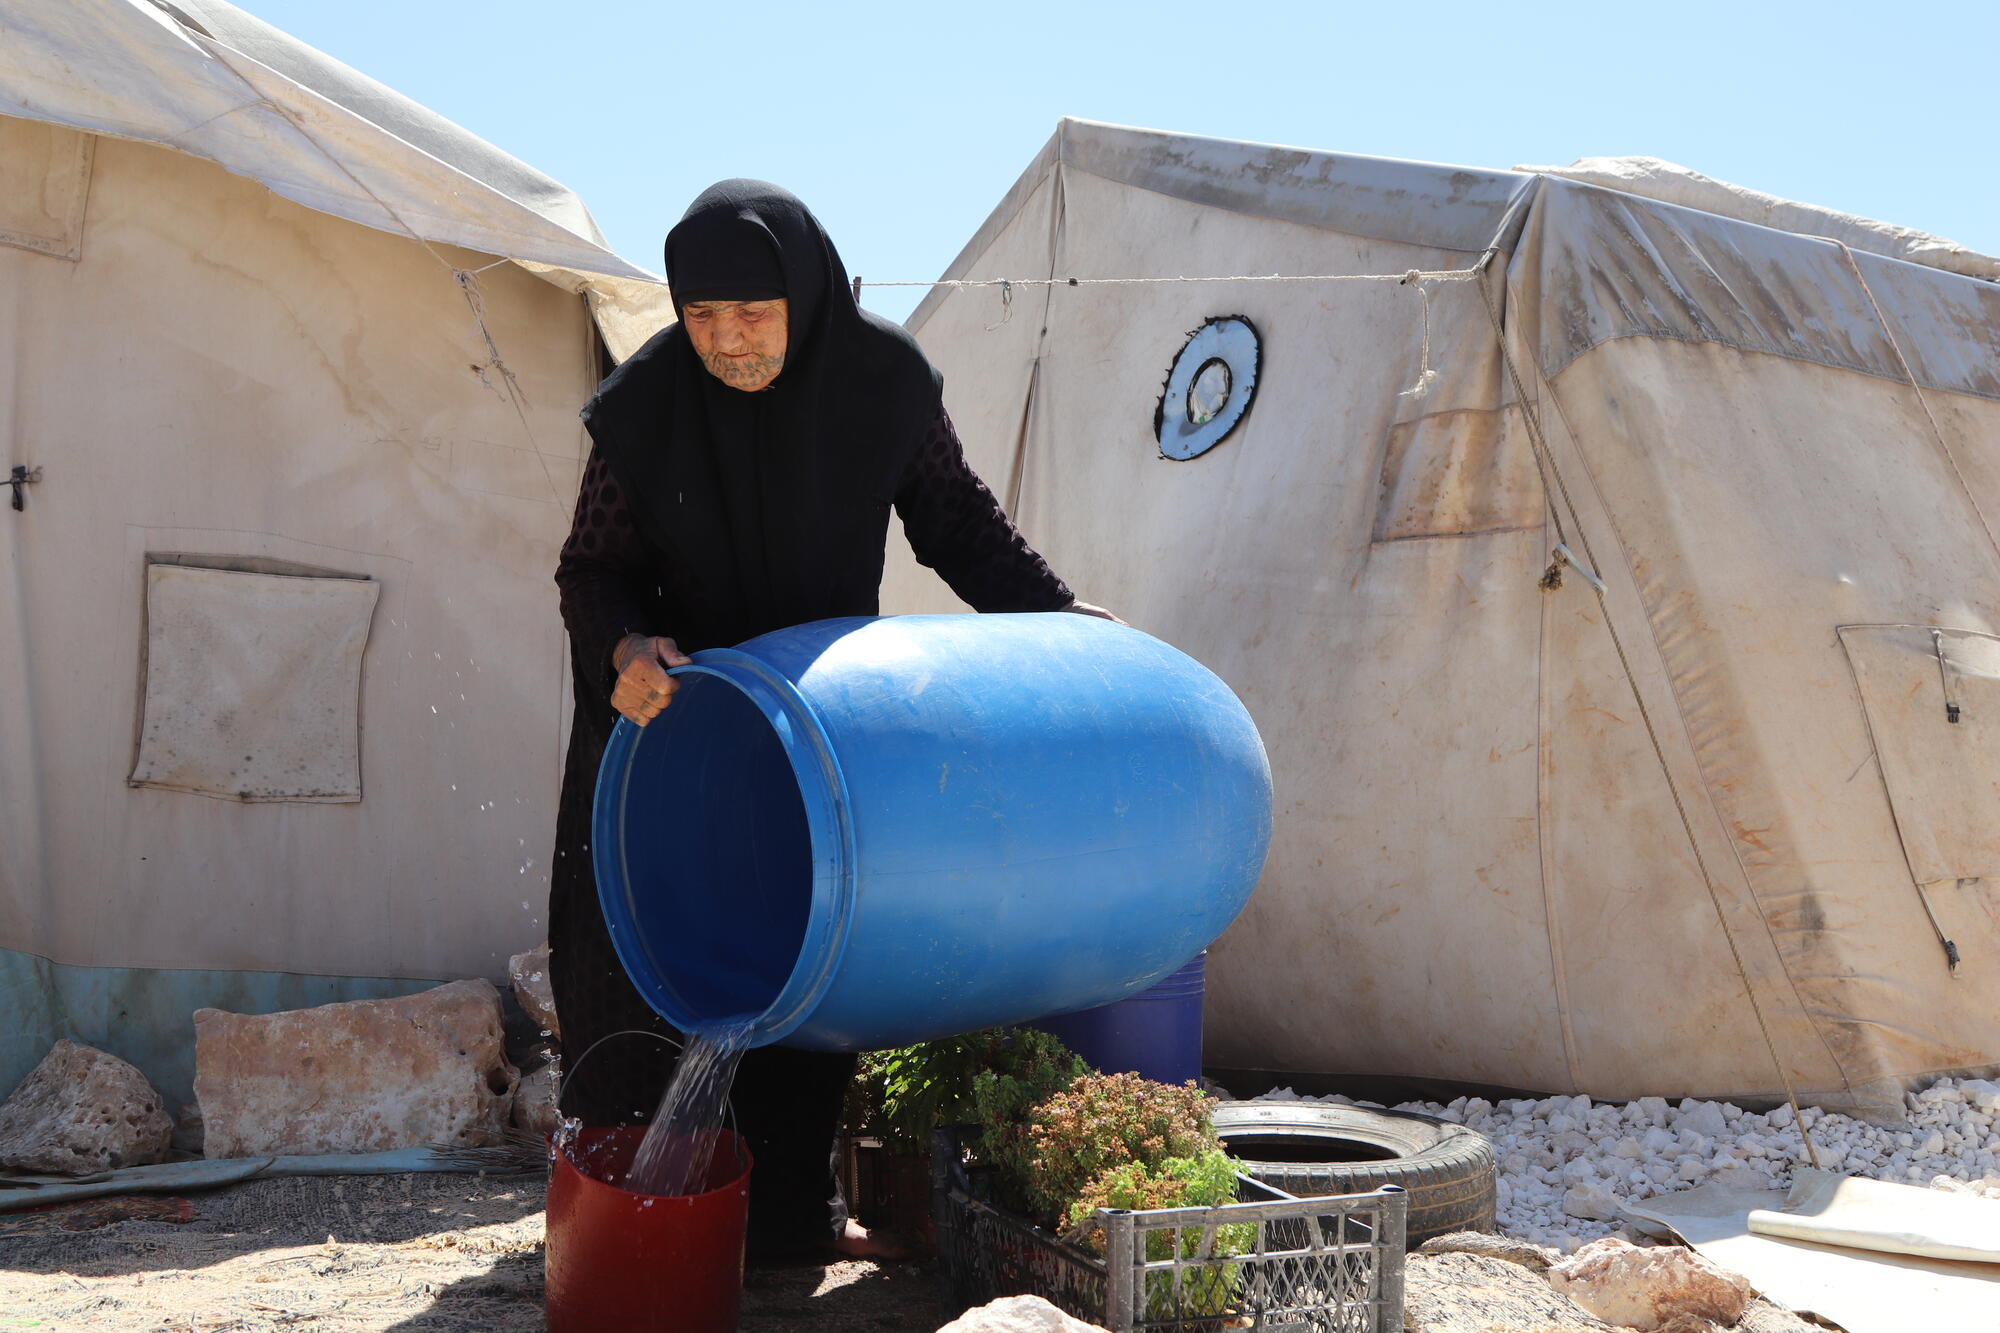 Lack of funding in northern Syria causes water crisis and serious health problems - Médecins Sans Frontières (MSF) International